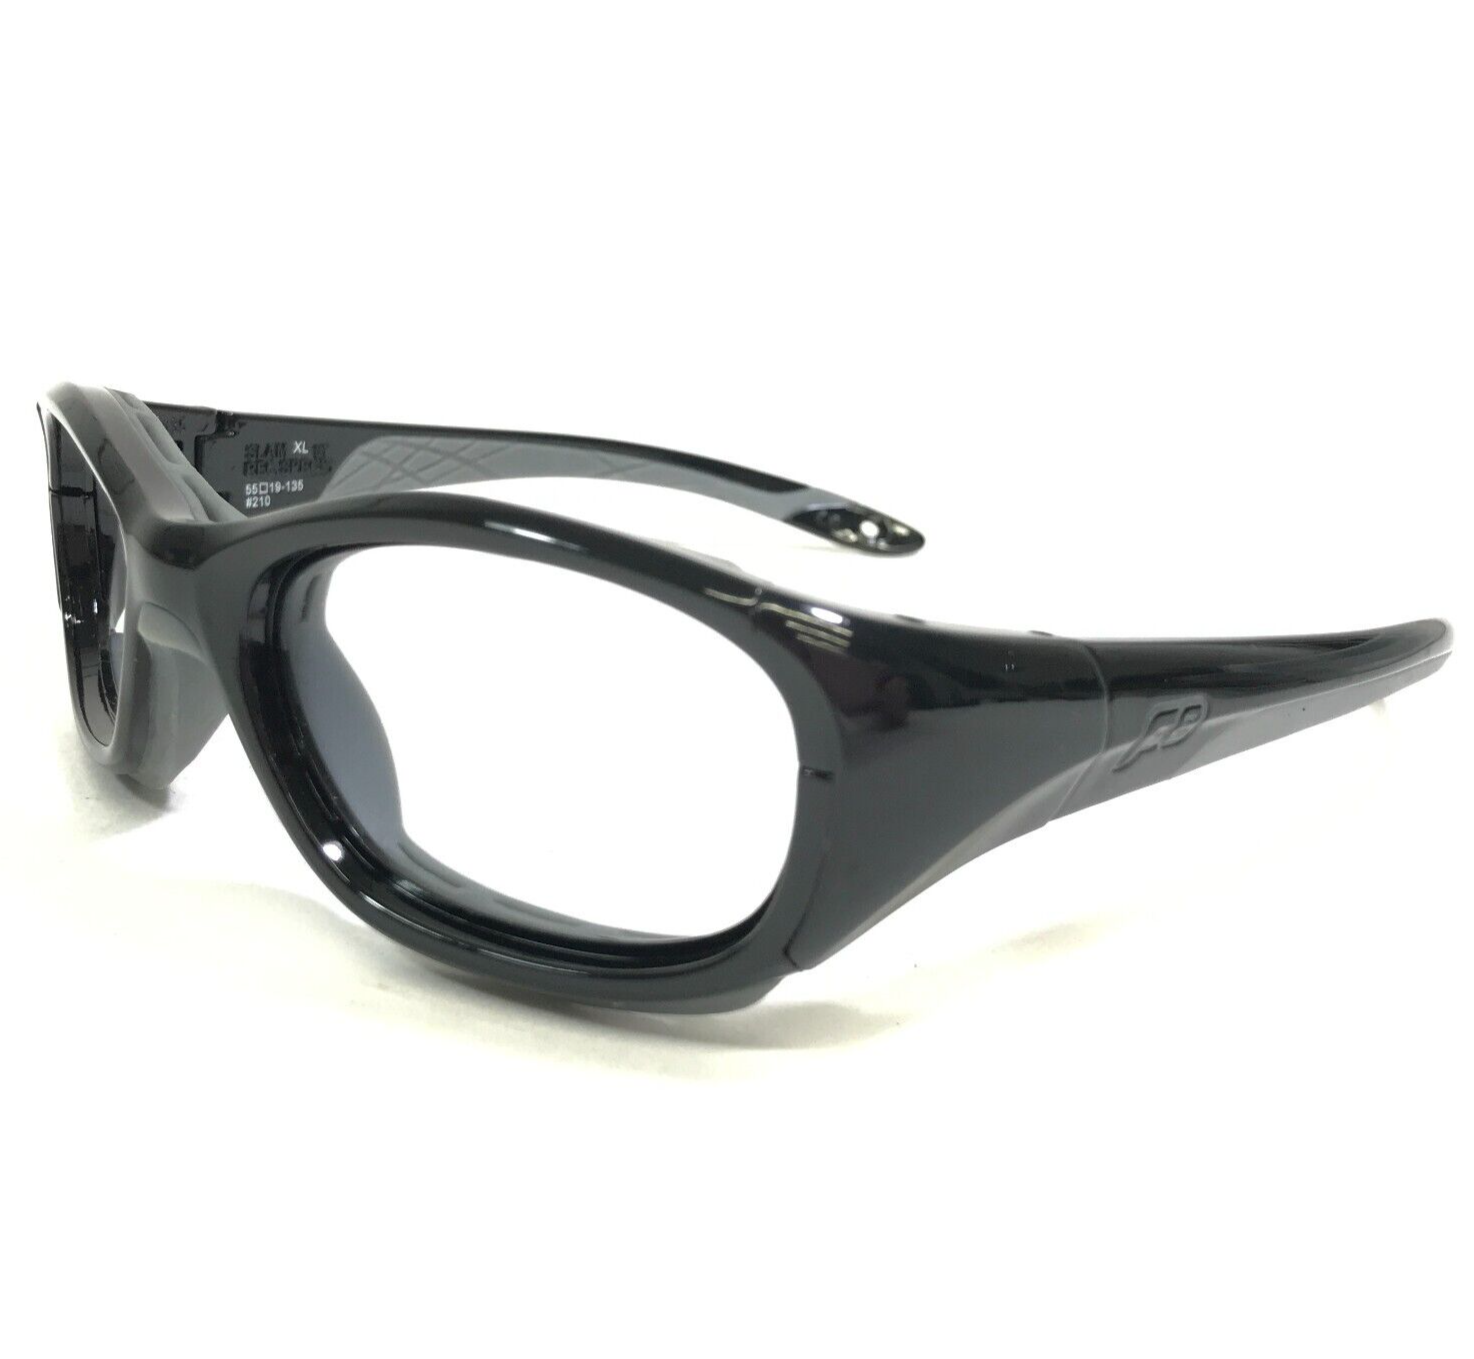 Primary image for Rec Specs Athletic Goggles Frames SLAM XL 210 Shiny Black Gray Wrap 55-19-135